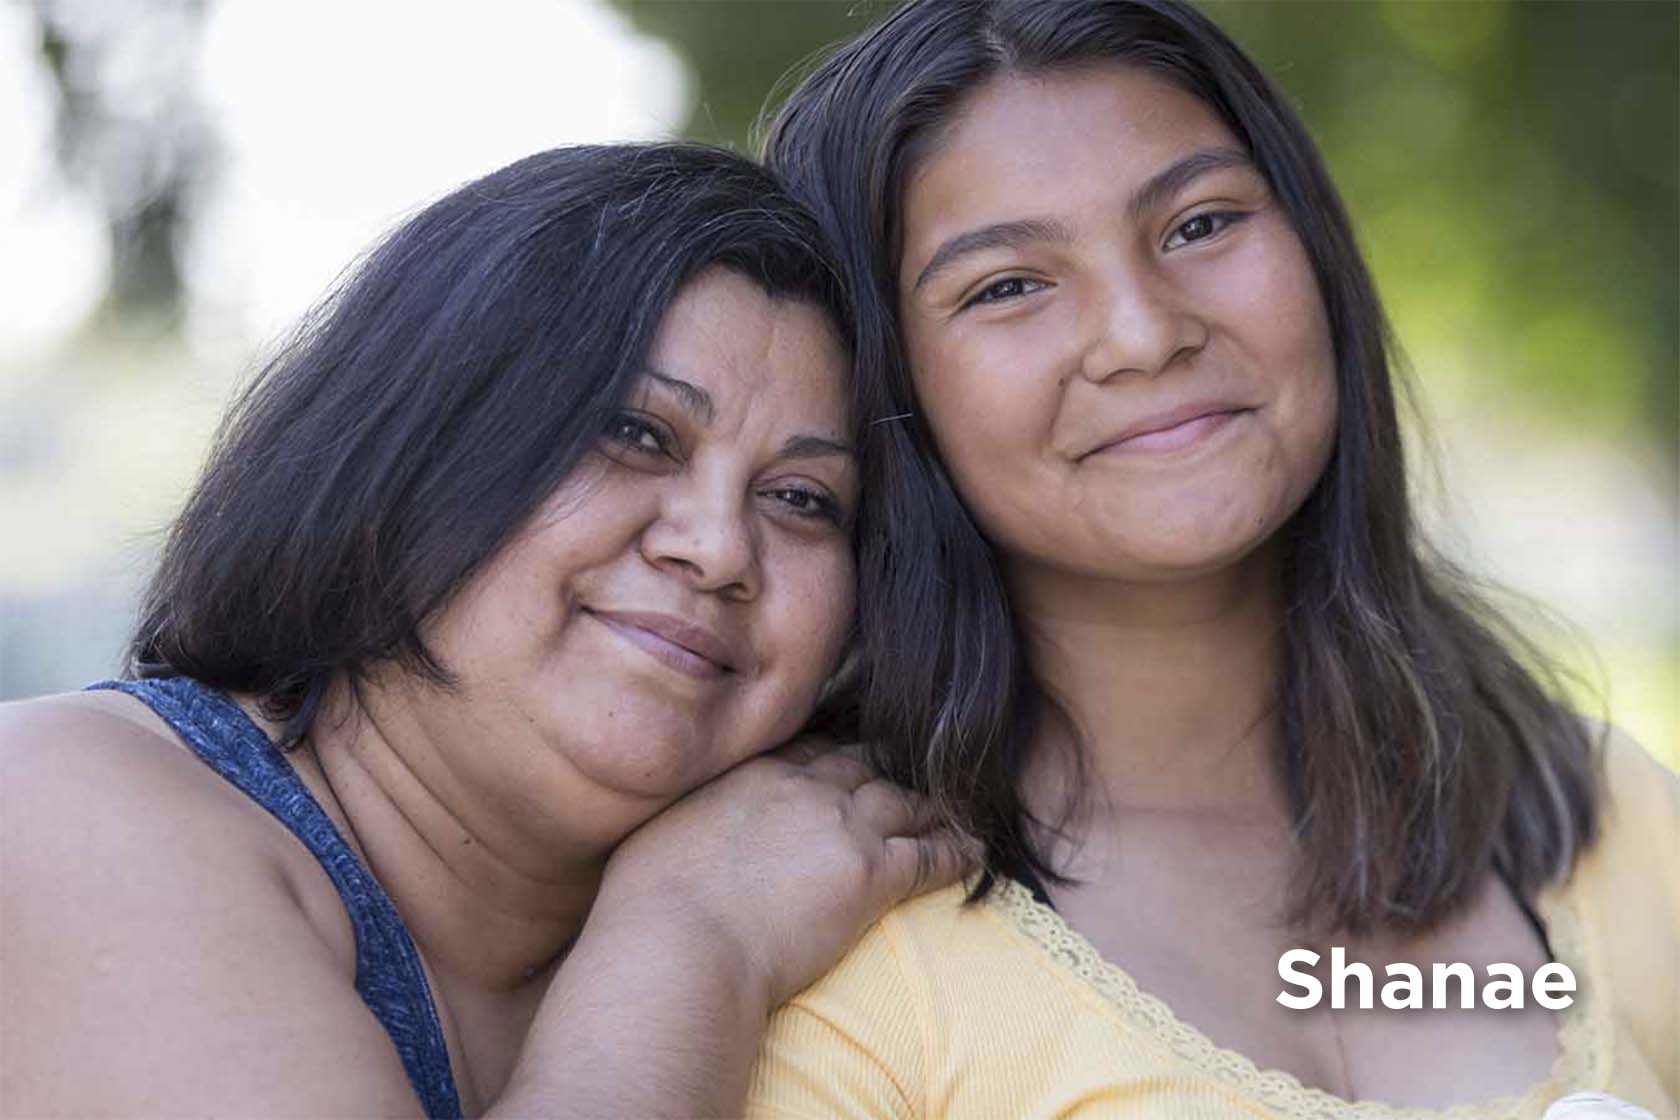 Shanae, a patient treated for a congenital heart defect at Seattle Children's, with her mother